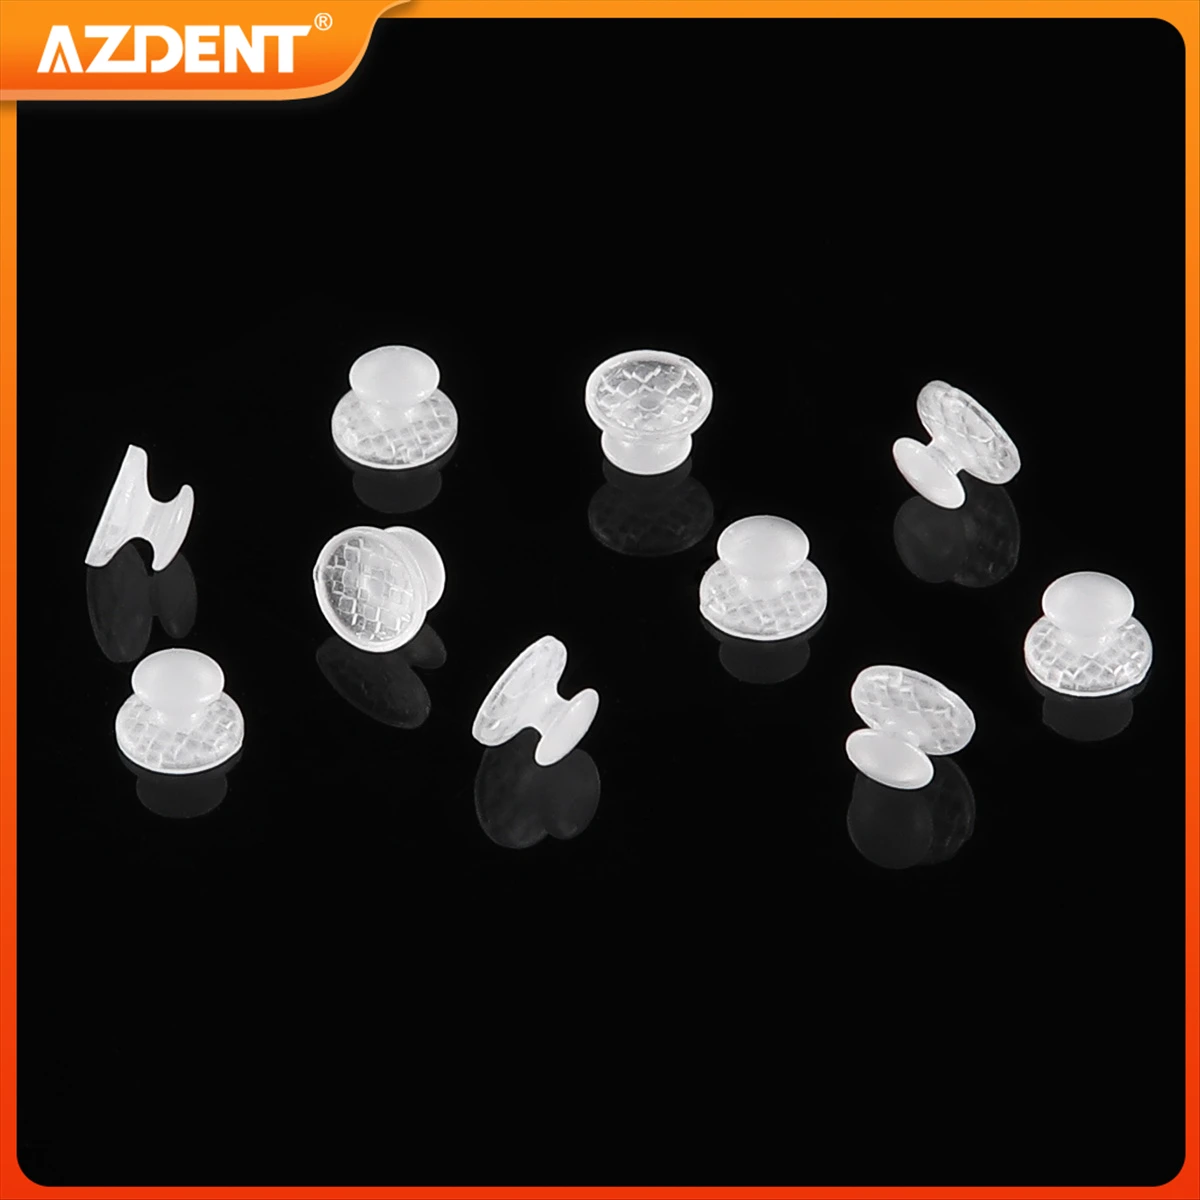 

AZDENT 10PCS/Pack Dental Orthodontic Lingual Buttons Composite Clear Ceramic Bondable Round and Rectangular Base